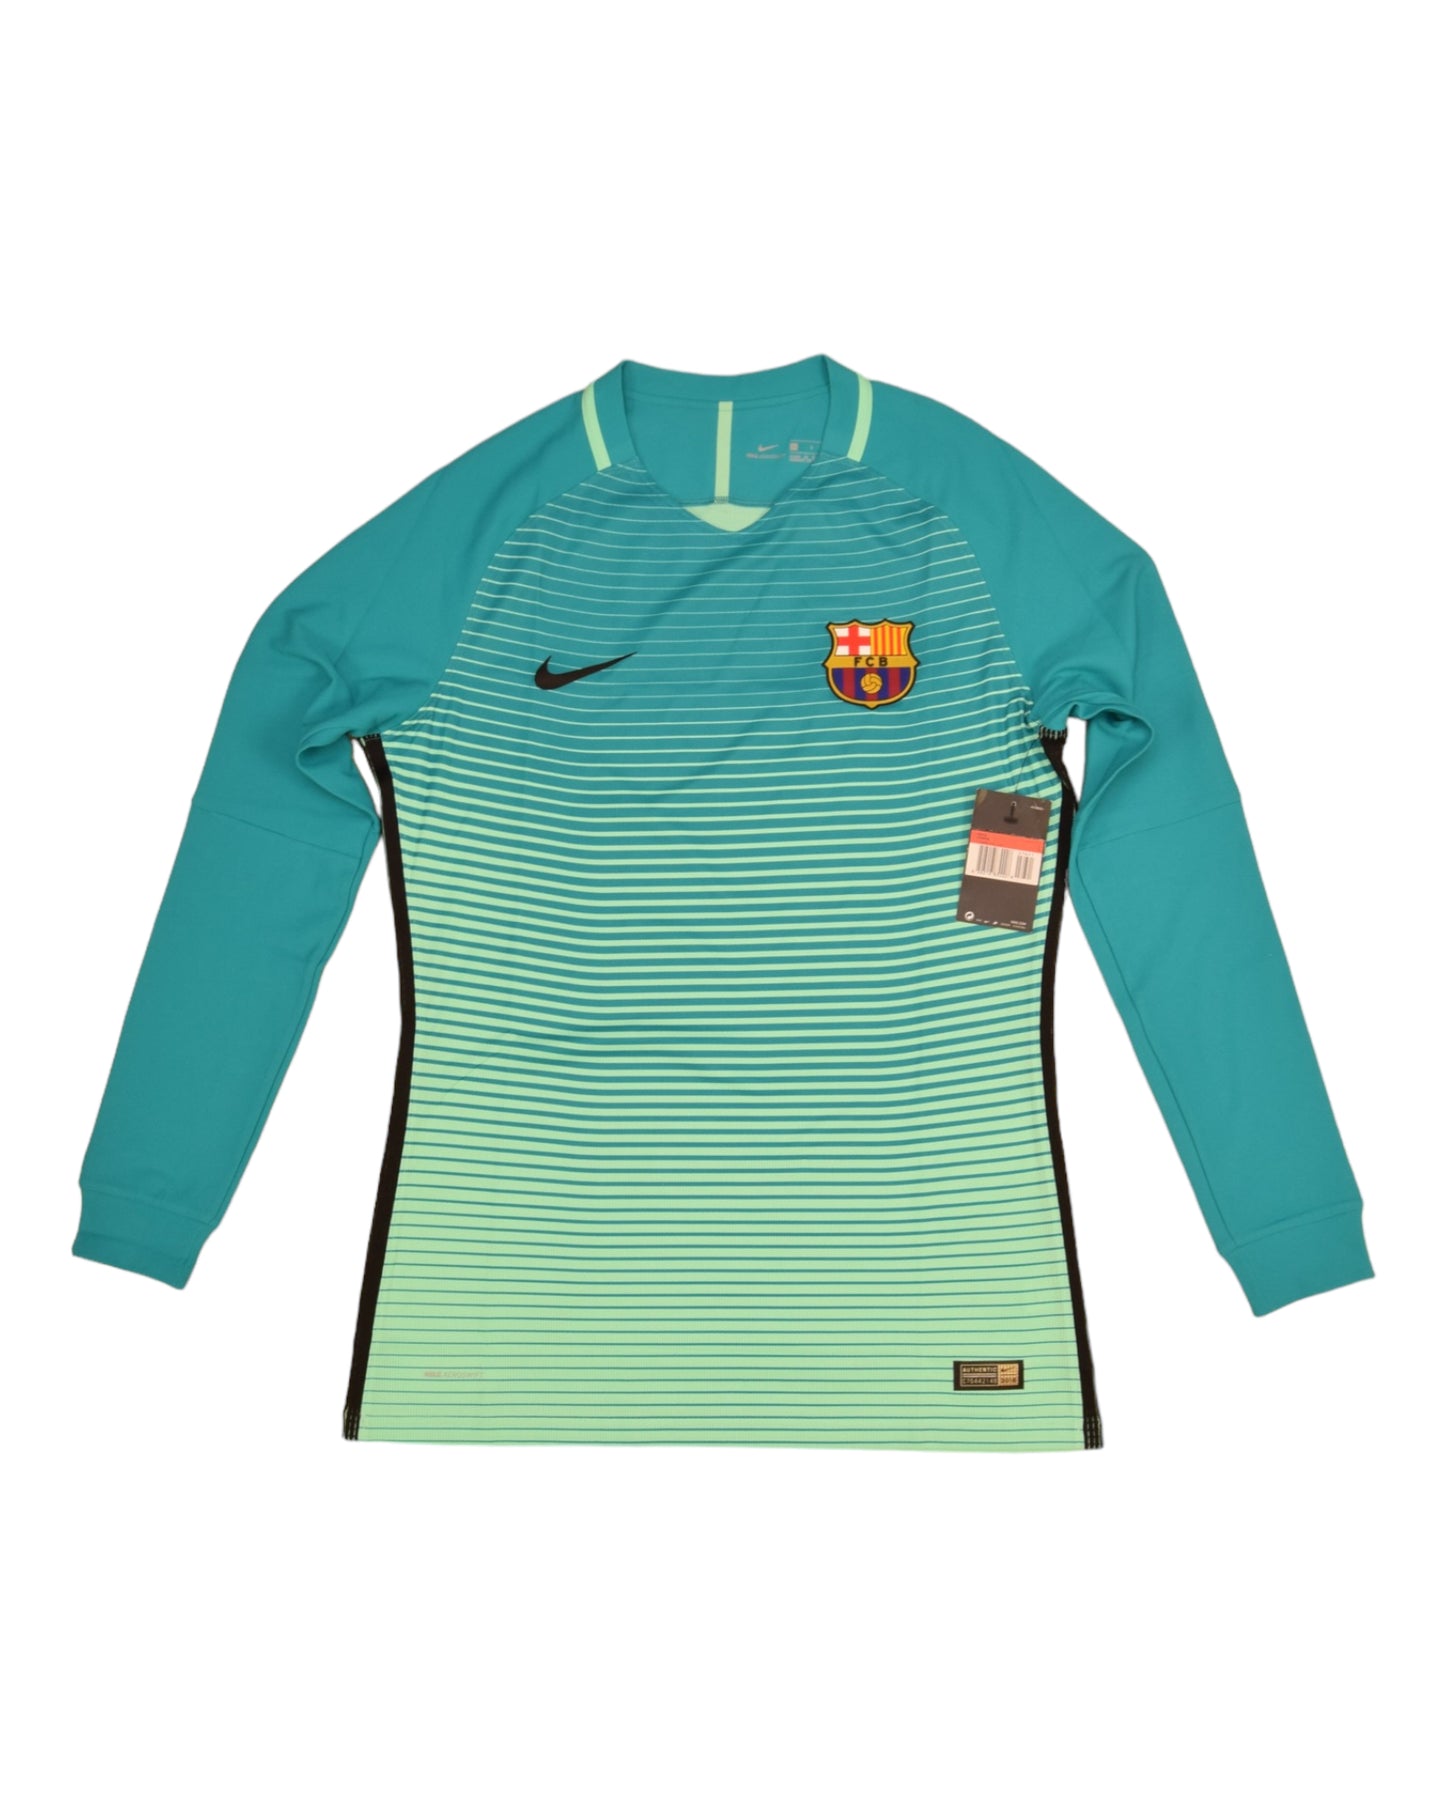 Barcelona Nike Aeroswift 2016 - 2017 Player Issue Away Third Football Shirt Size L Long Sleeves New BNWT Deadstock Unicef Teal Mint Green